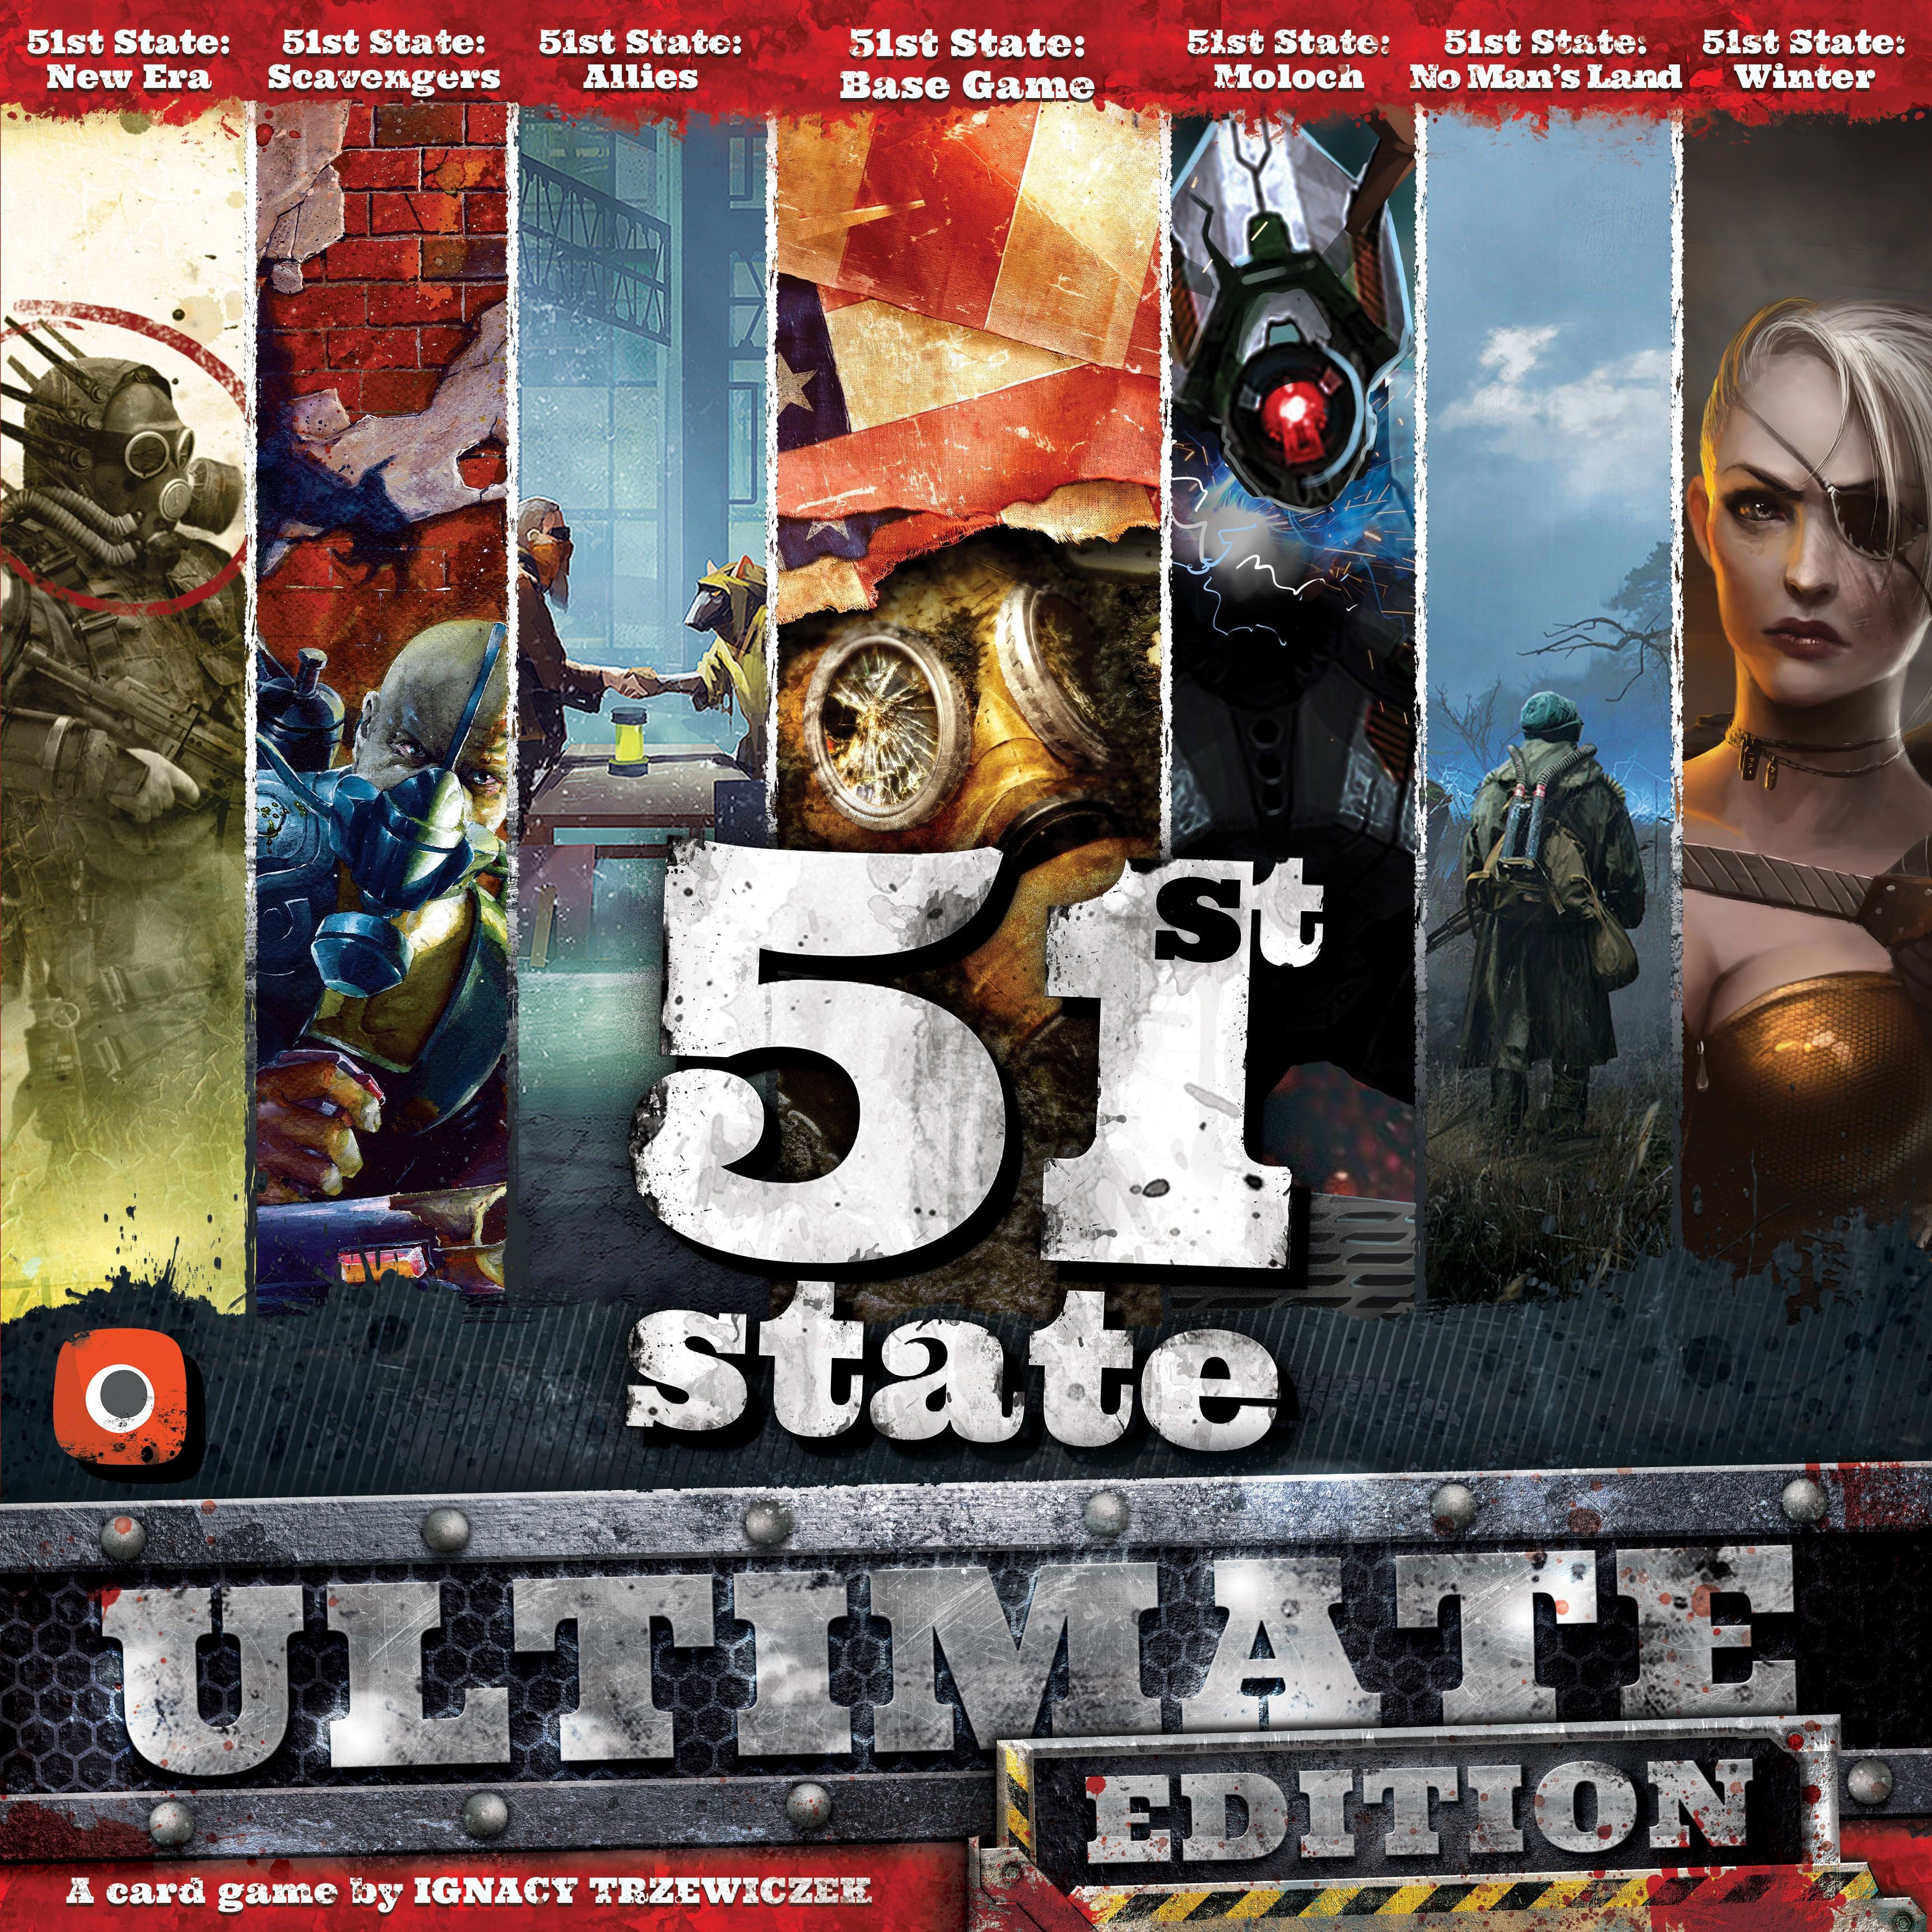 51st State: Ultimate Edition (Gamefound Edition)